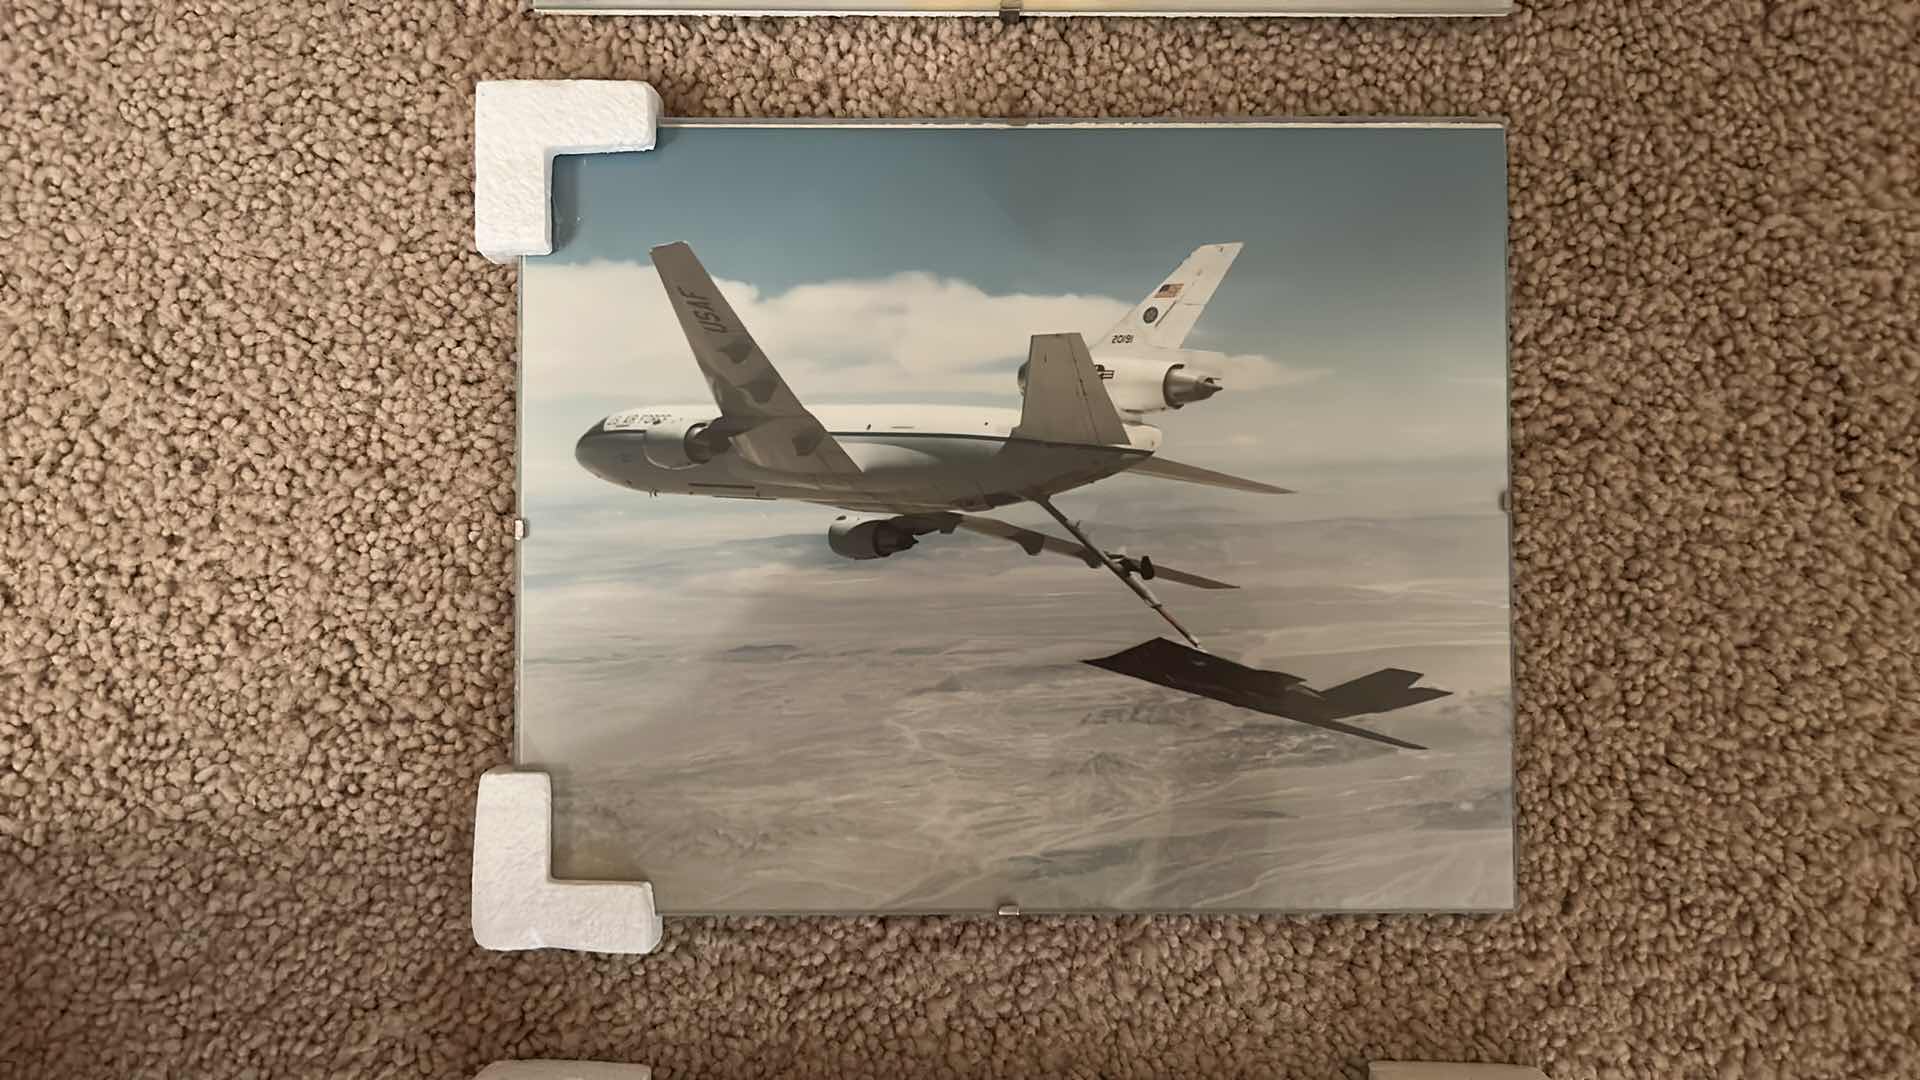 Photo 3 of 3 PHOTOS - STEALTH FIGHTER JET AVIATION AIRCRAFT 10” x 8”